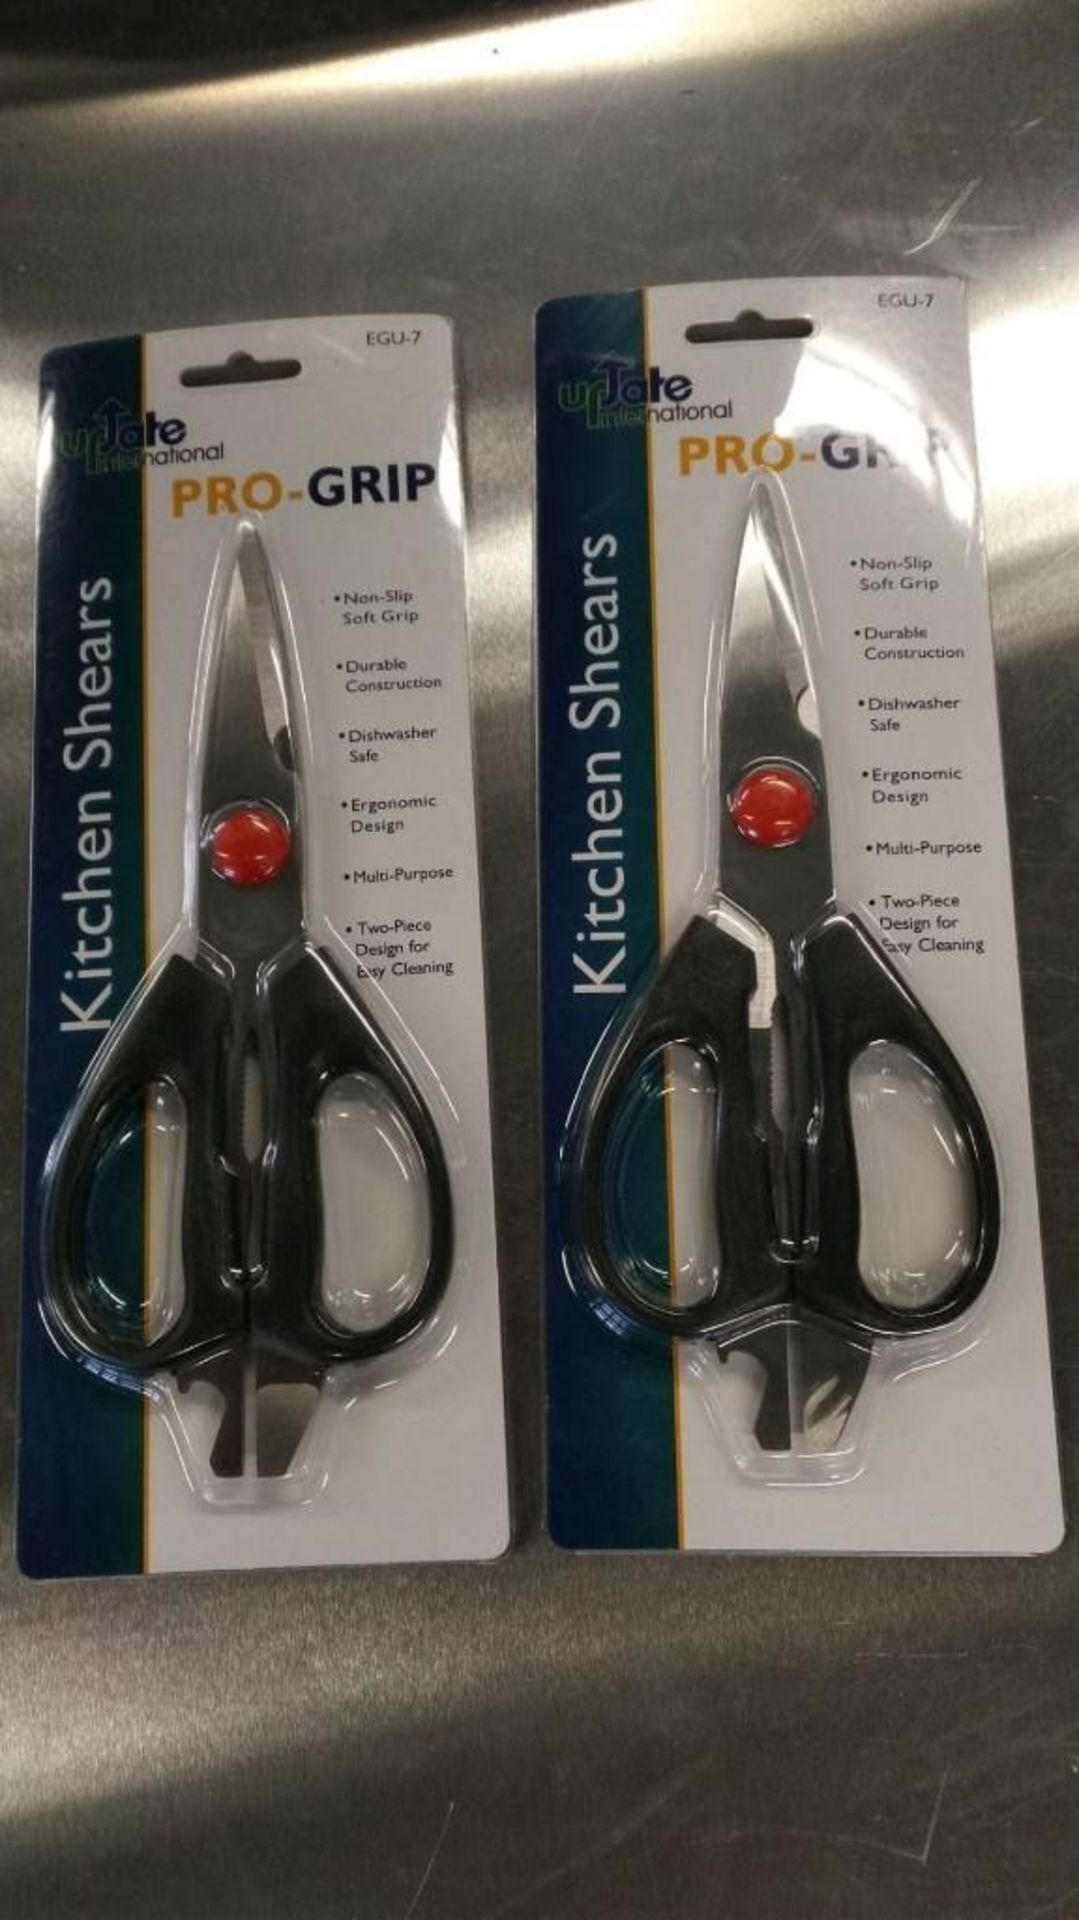 PRO-GRIP KITCHEN SHEARS, UPDATE EGU-7, LOT OF 2 - NEW - Image 2 of 2